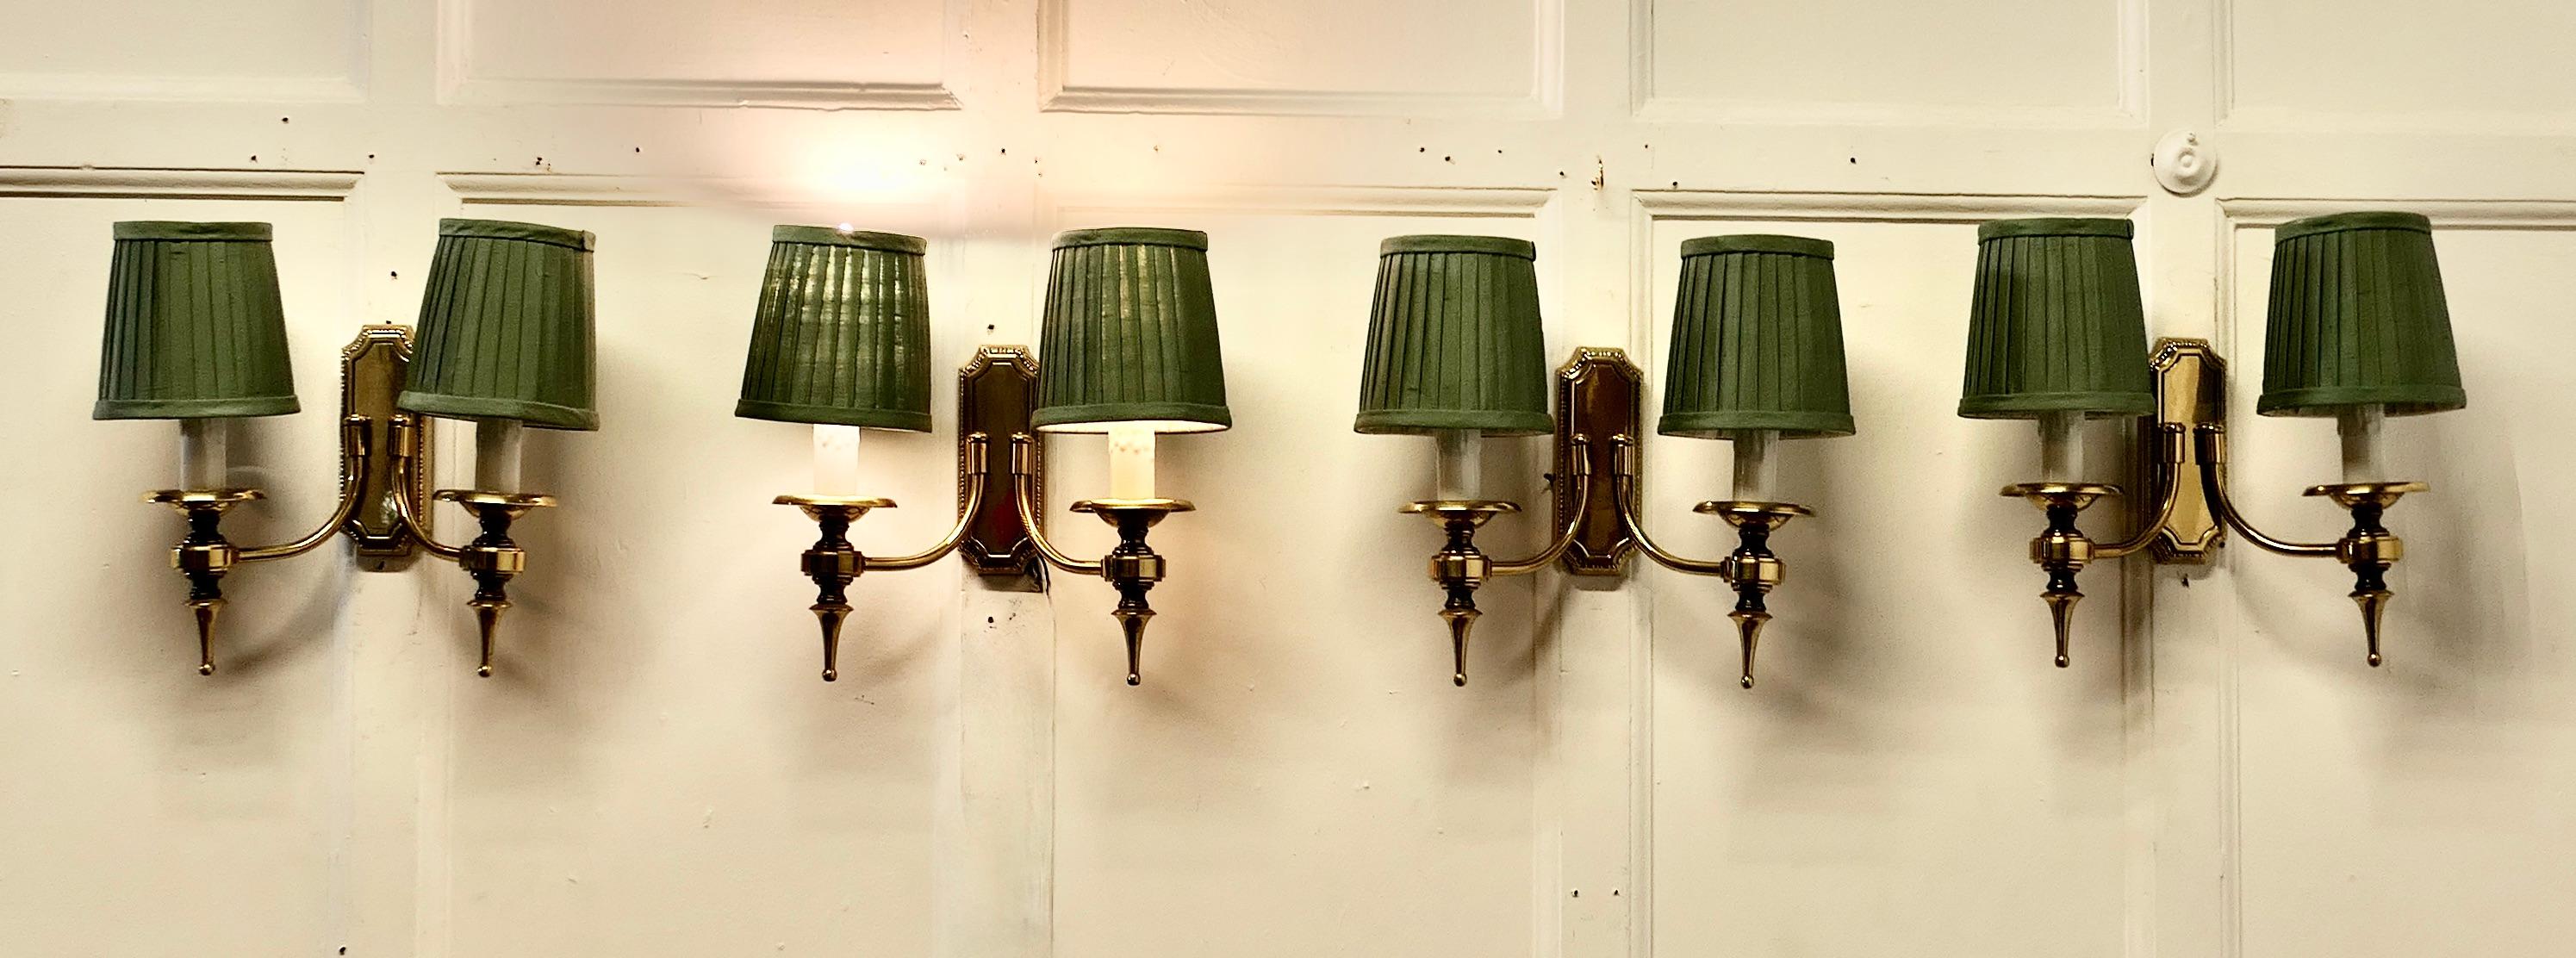 A Set of 4 Twin Wall Lights

A very handsome set of 4 double wall lights, the lights are in brass in an attractive designed with ceramic simulated candles and pleated shades in Teal/Grey 
The lights are in good and working condition, the will have